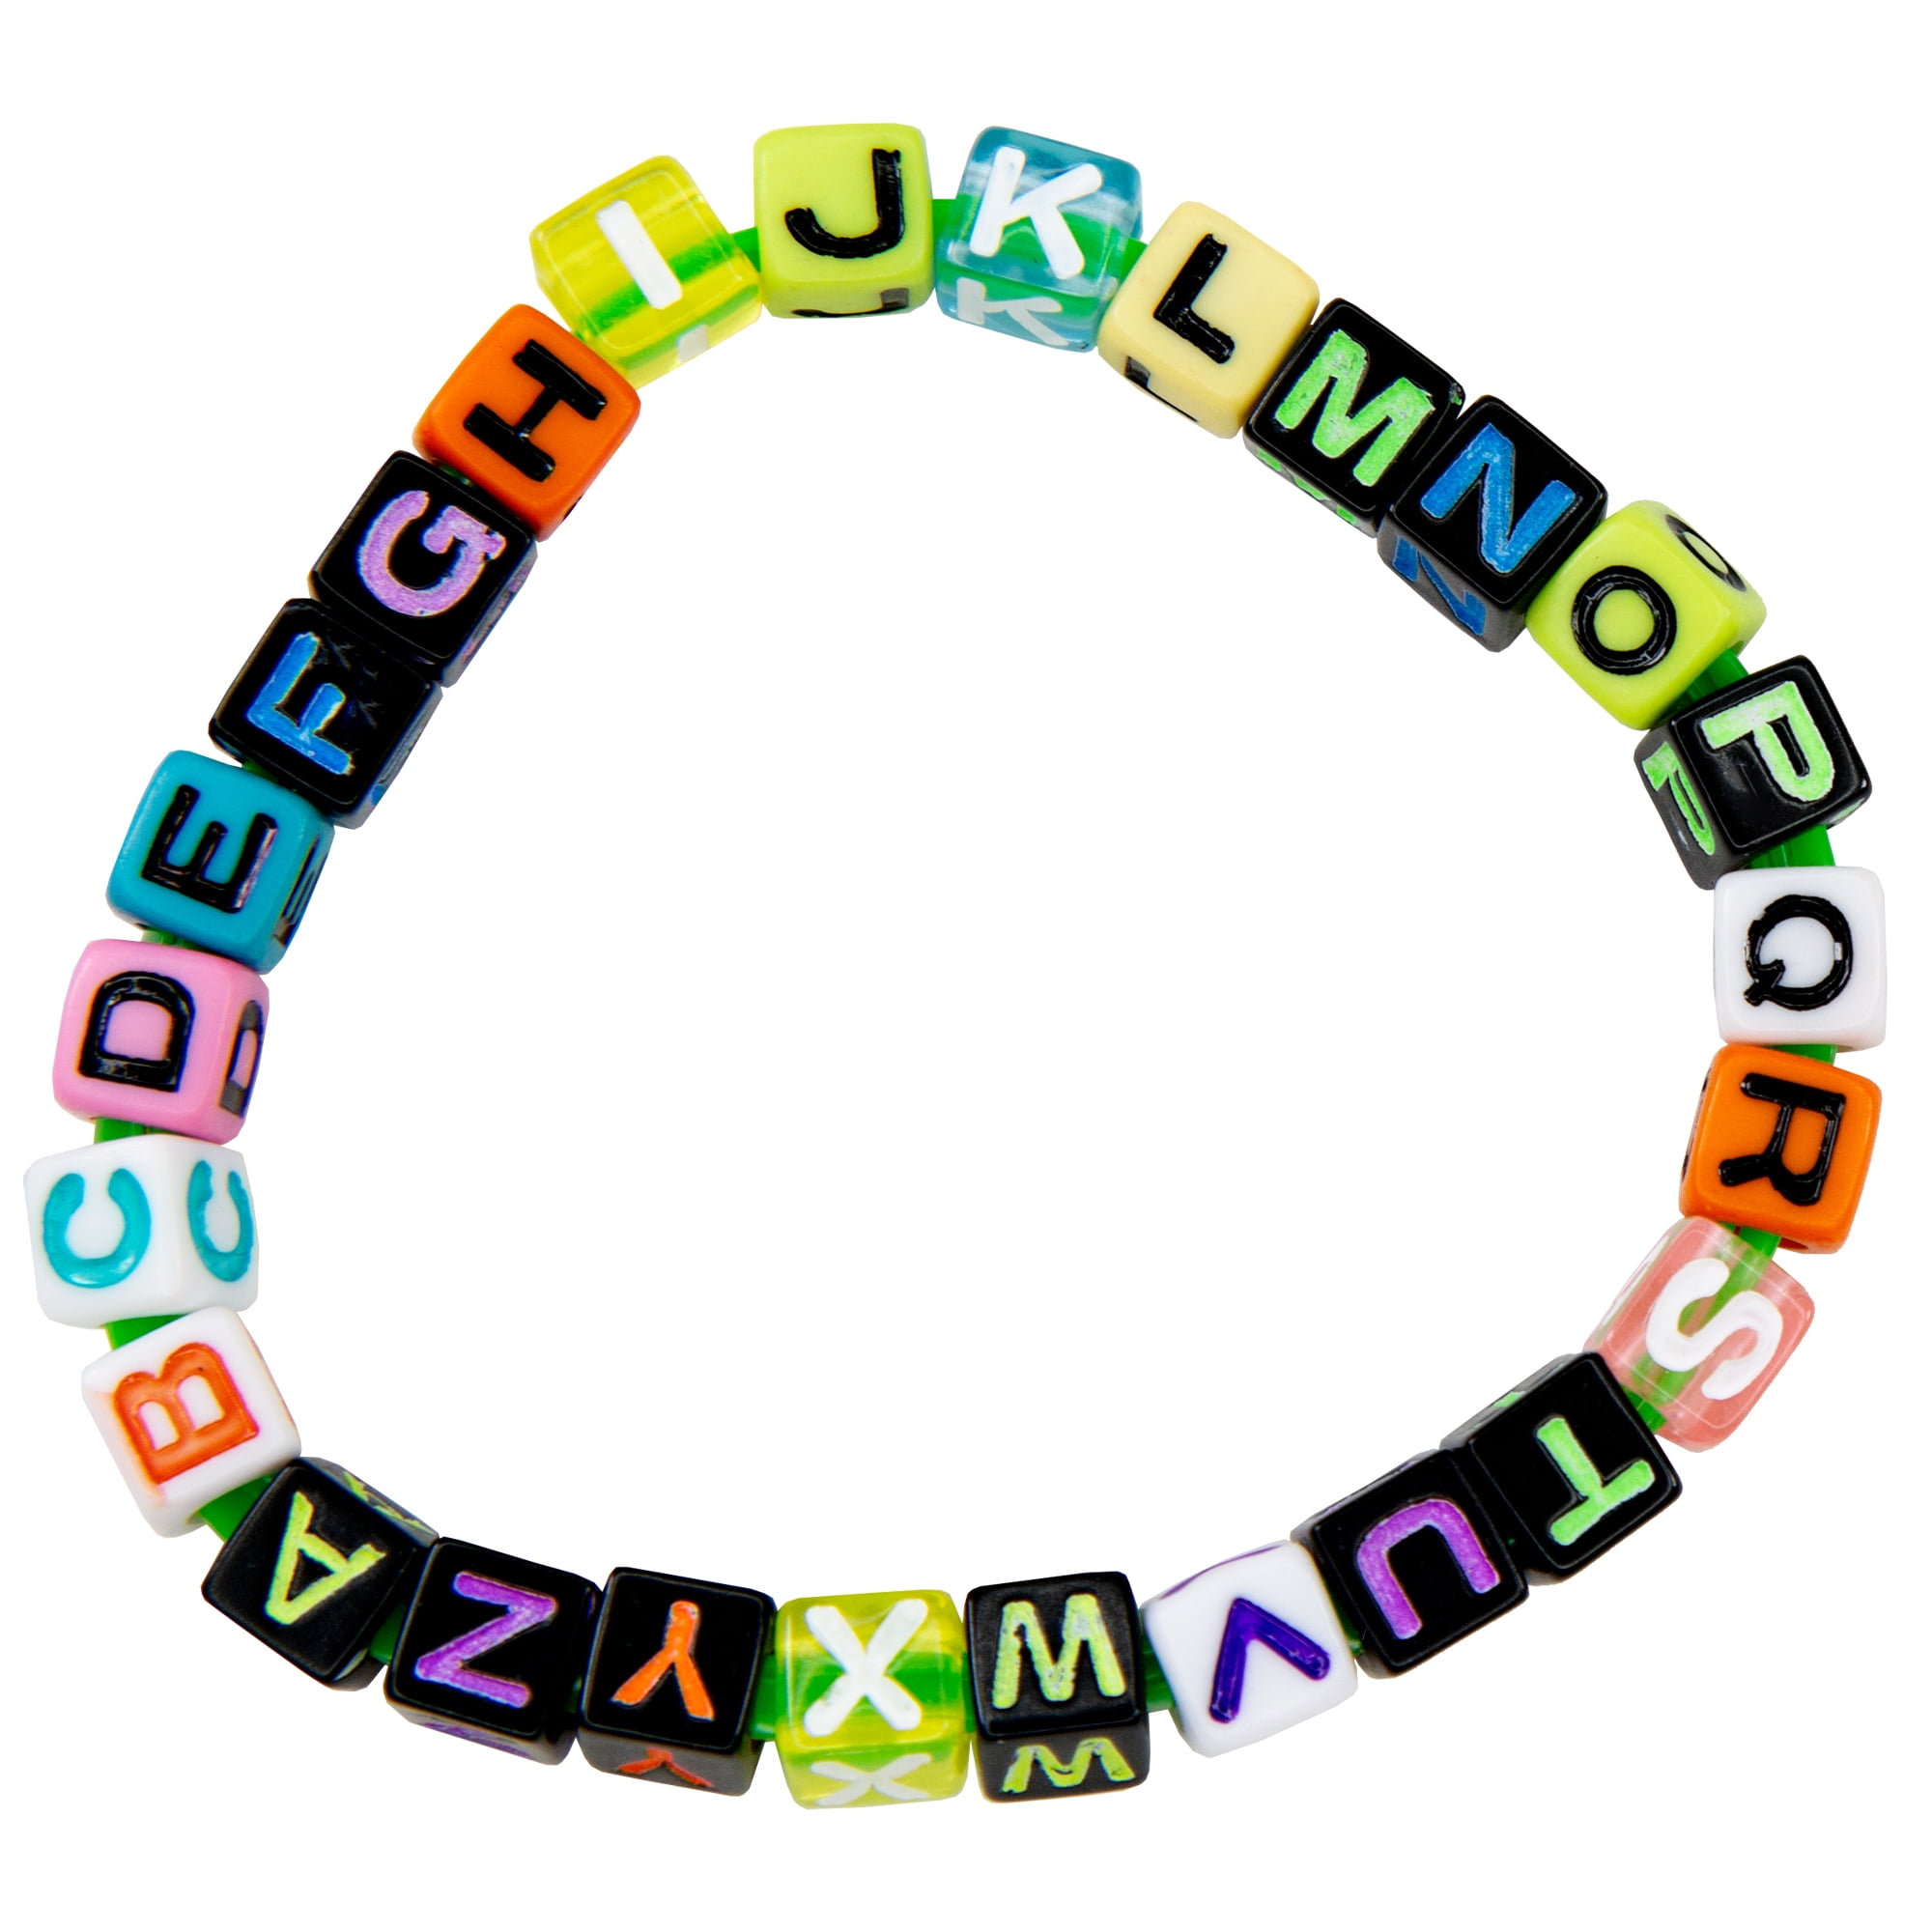 Baby Products Online - Colorful Letbd Large Letter Beads, Plastic, 300  Pieces, Language, Arts and Crafts, For Kids, Beads, Teachers, Motor Skills,  Multi-Color - Kideno